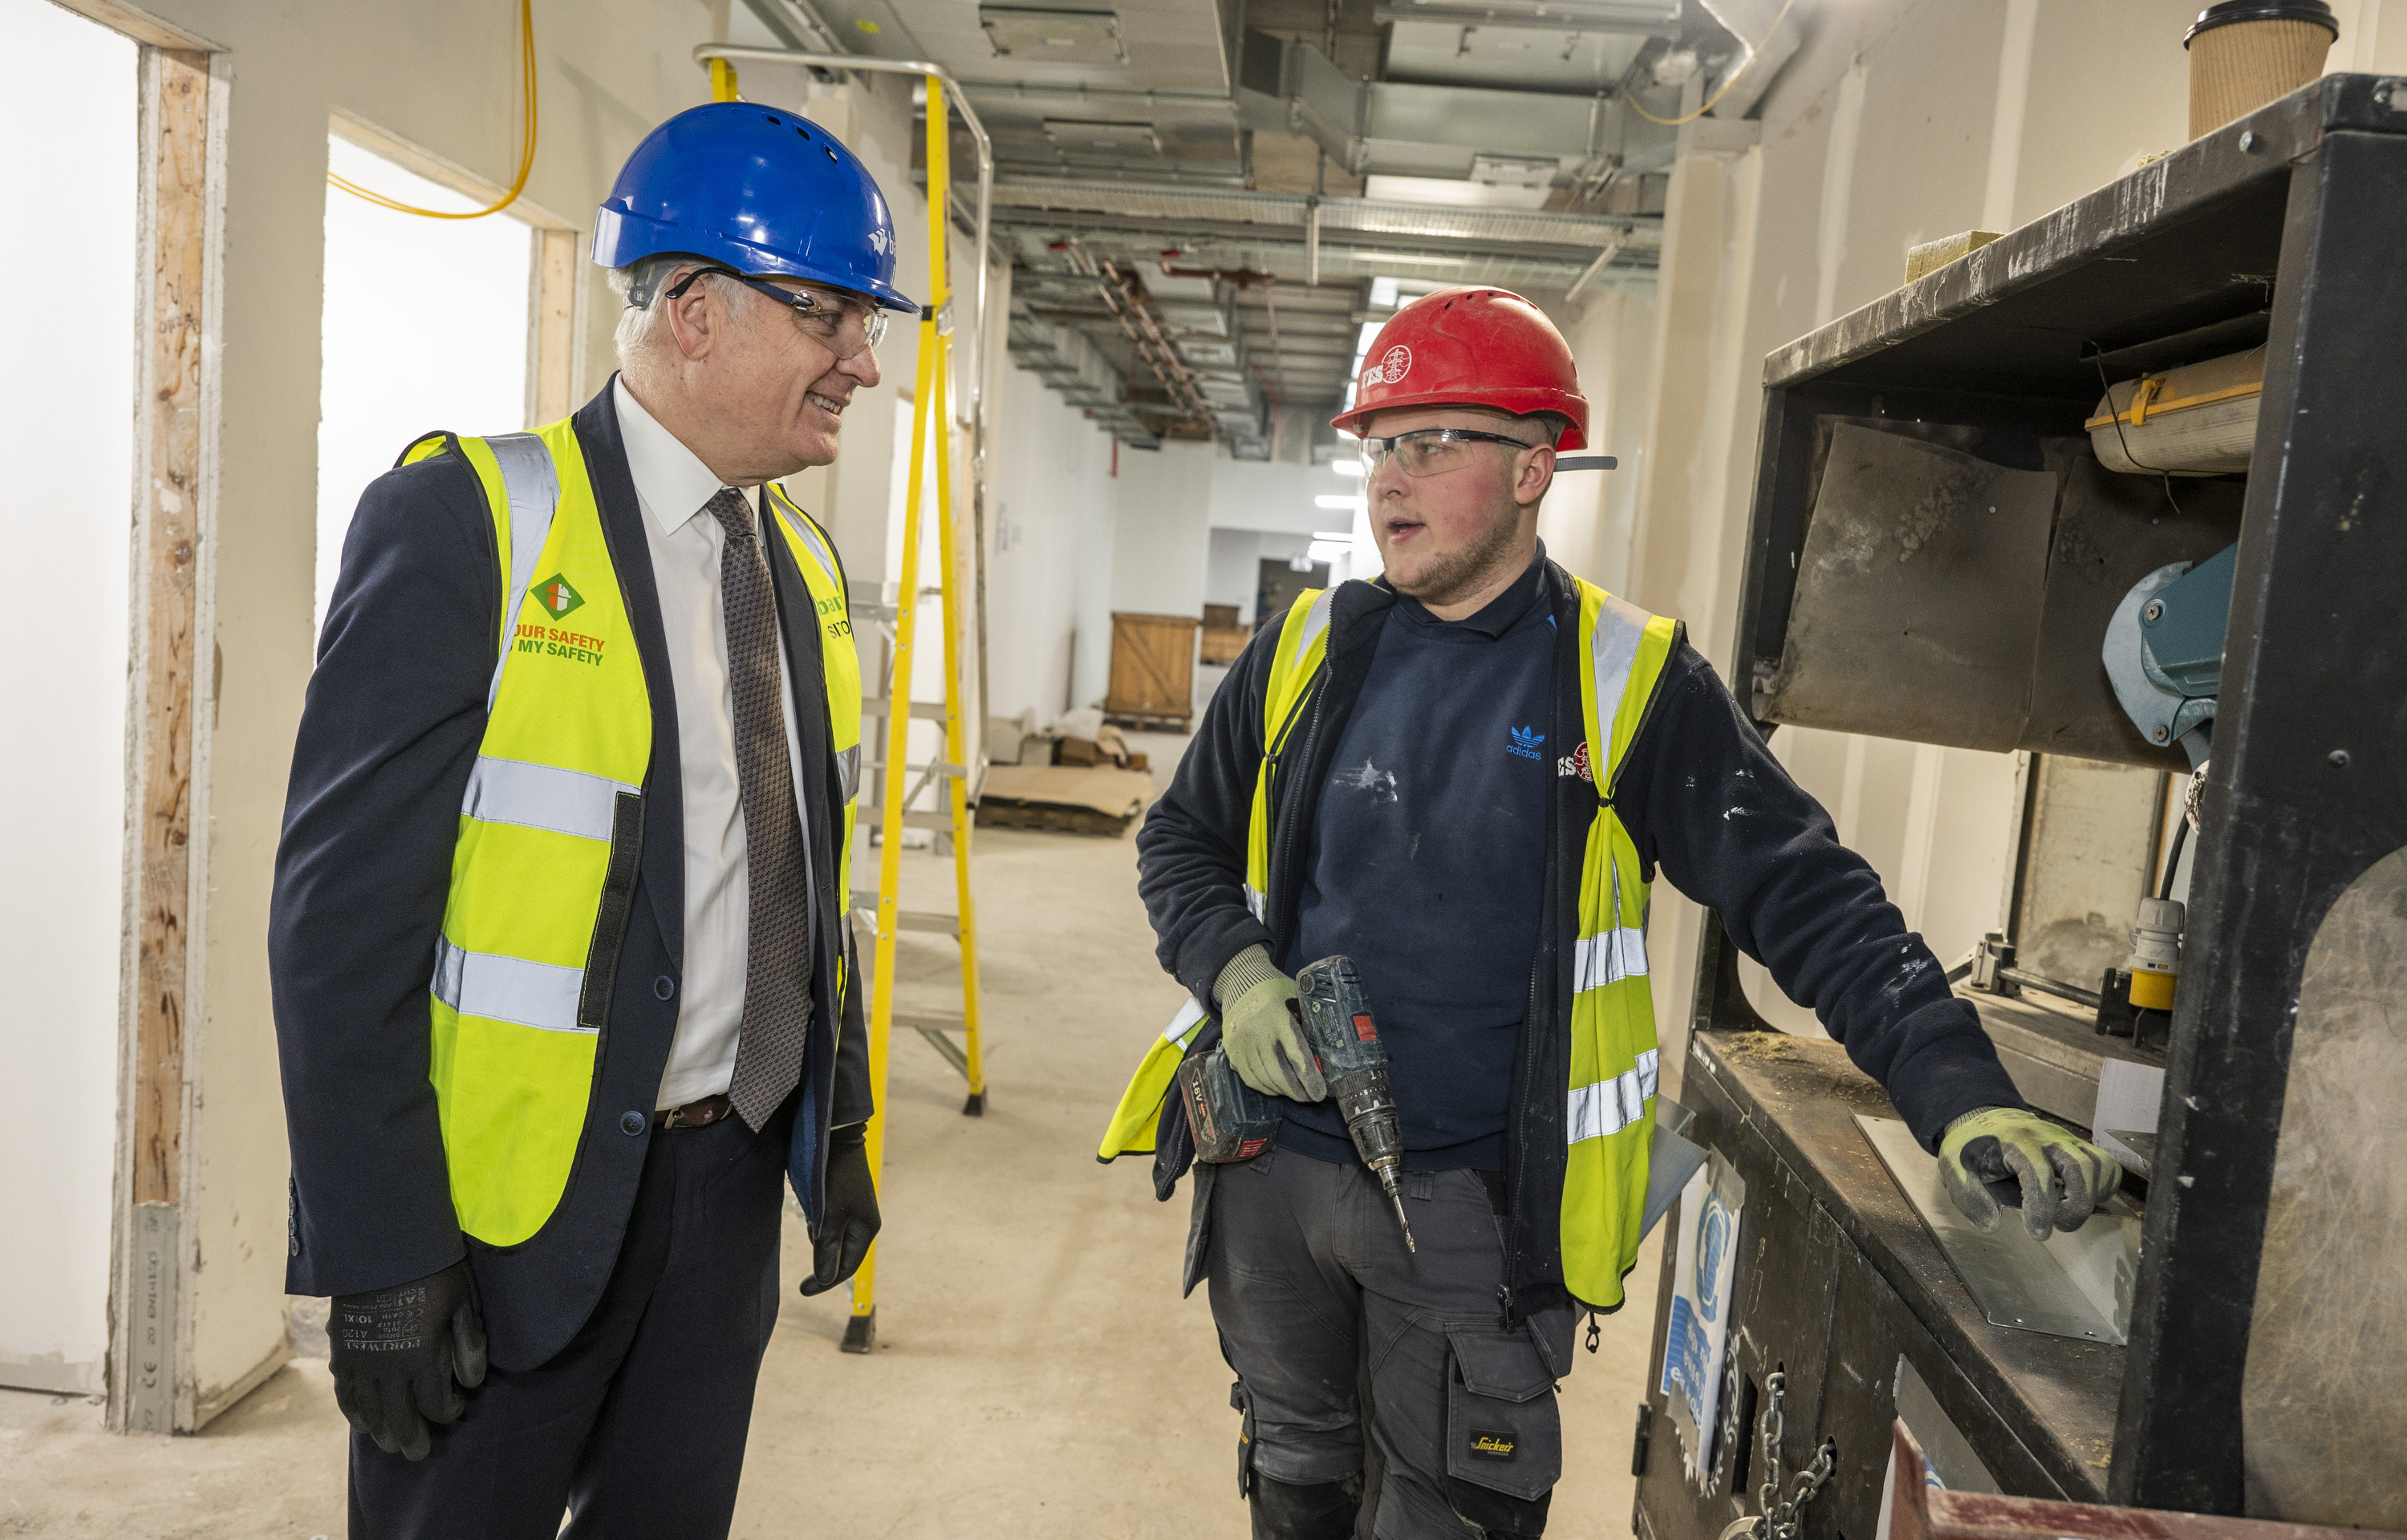 Minister sees quality approach at £250m Dunfermline Learning Campus